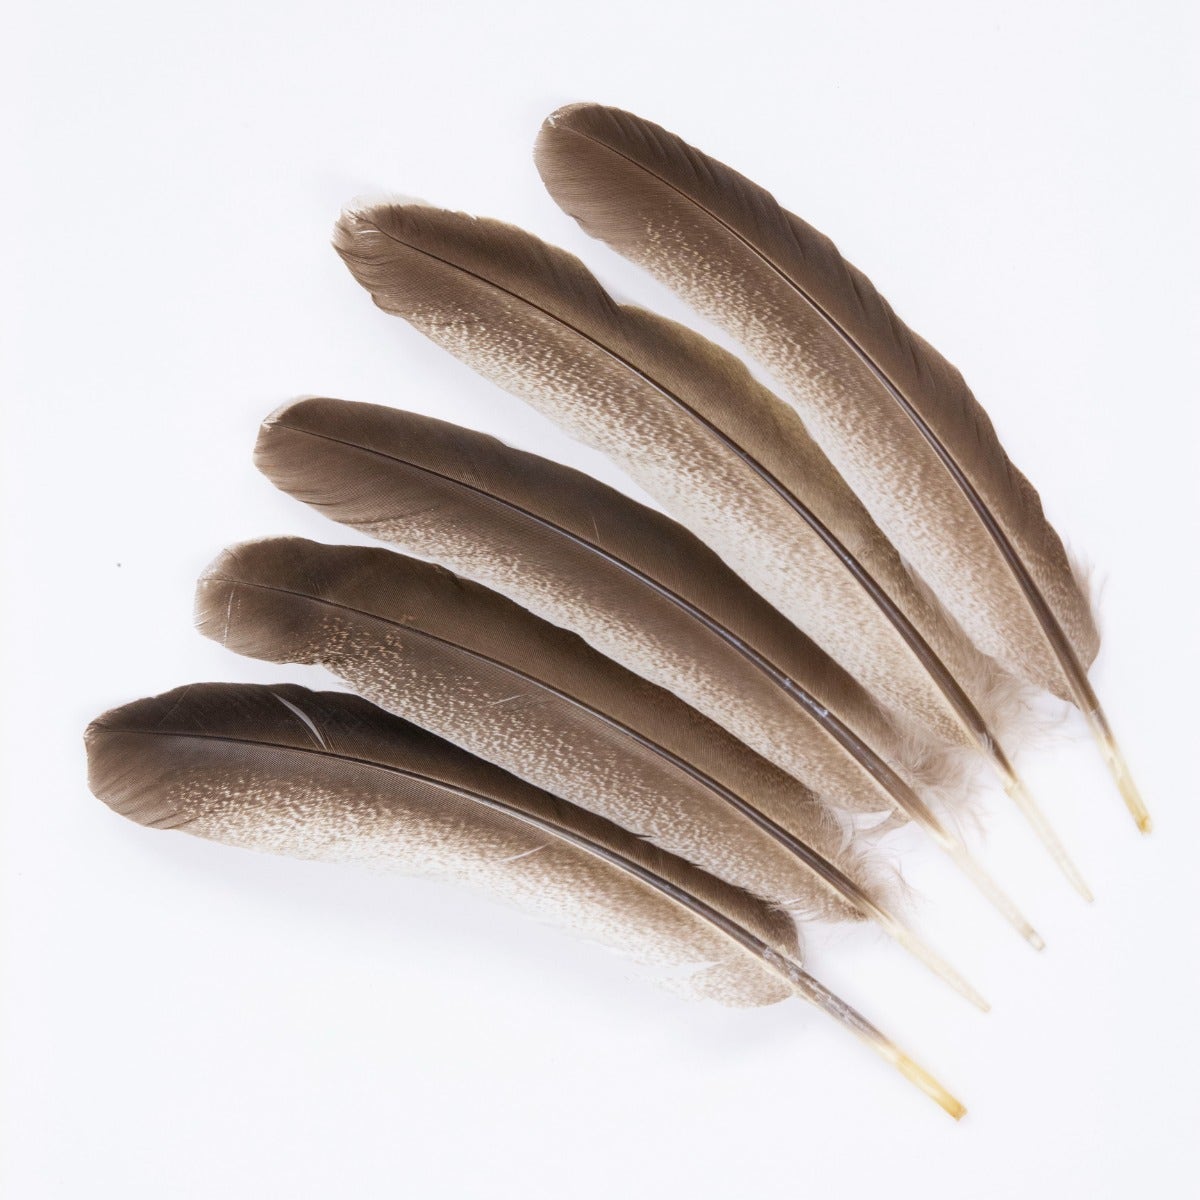 Cinnamon Turkey Quills Selected Feathers - Black-Eggshell-Natural - 12 Pieces